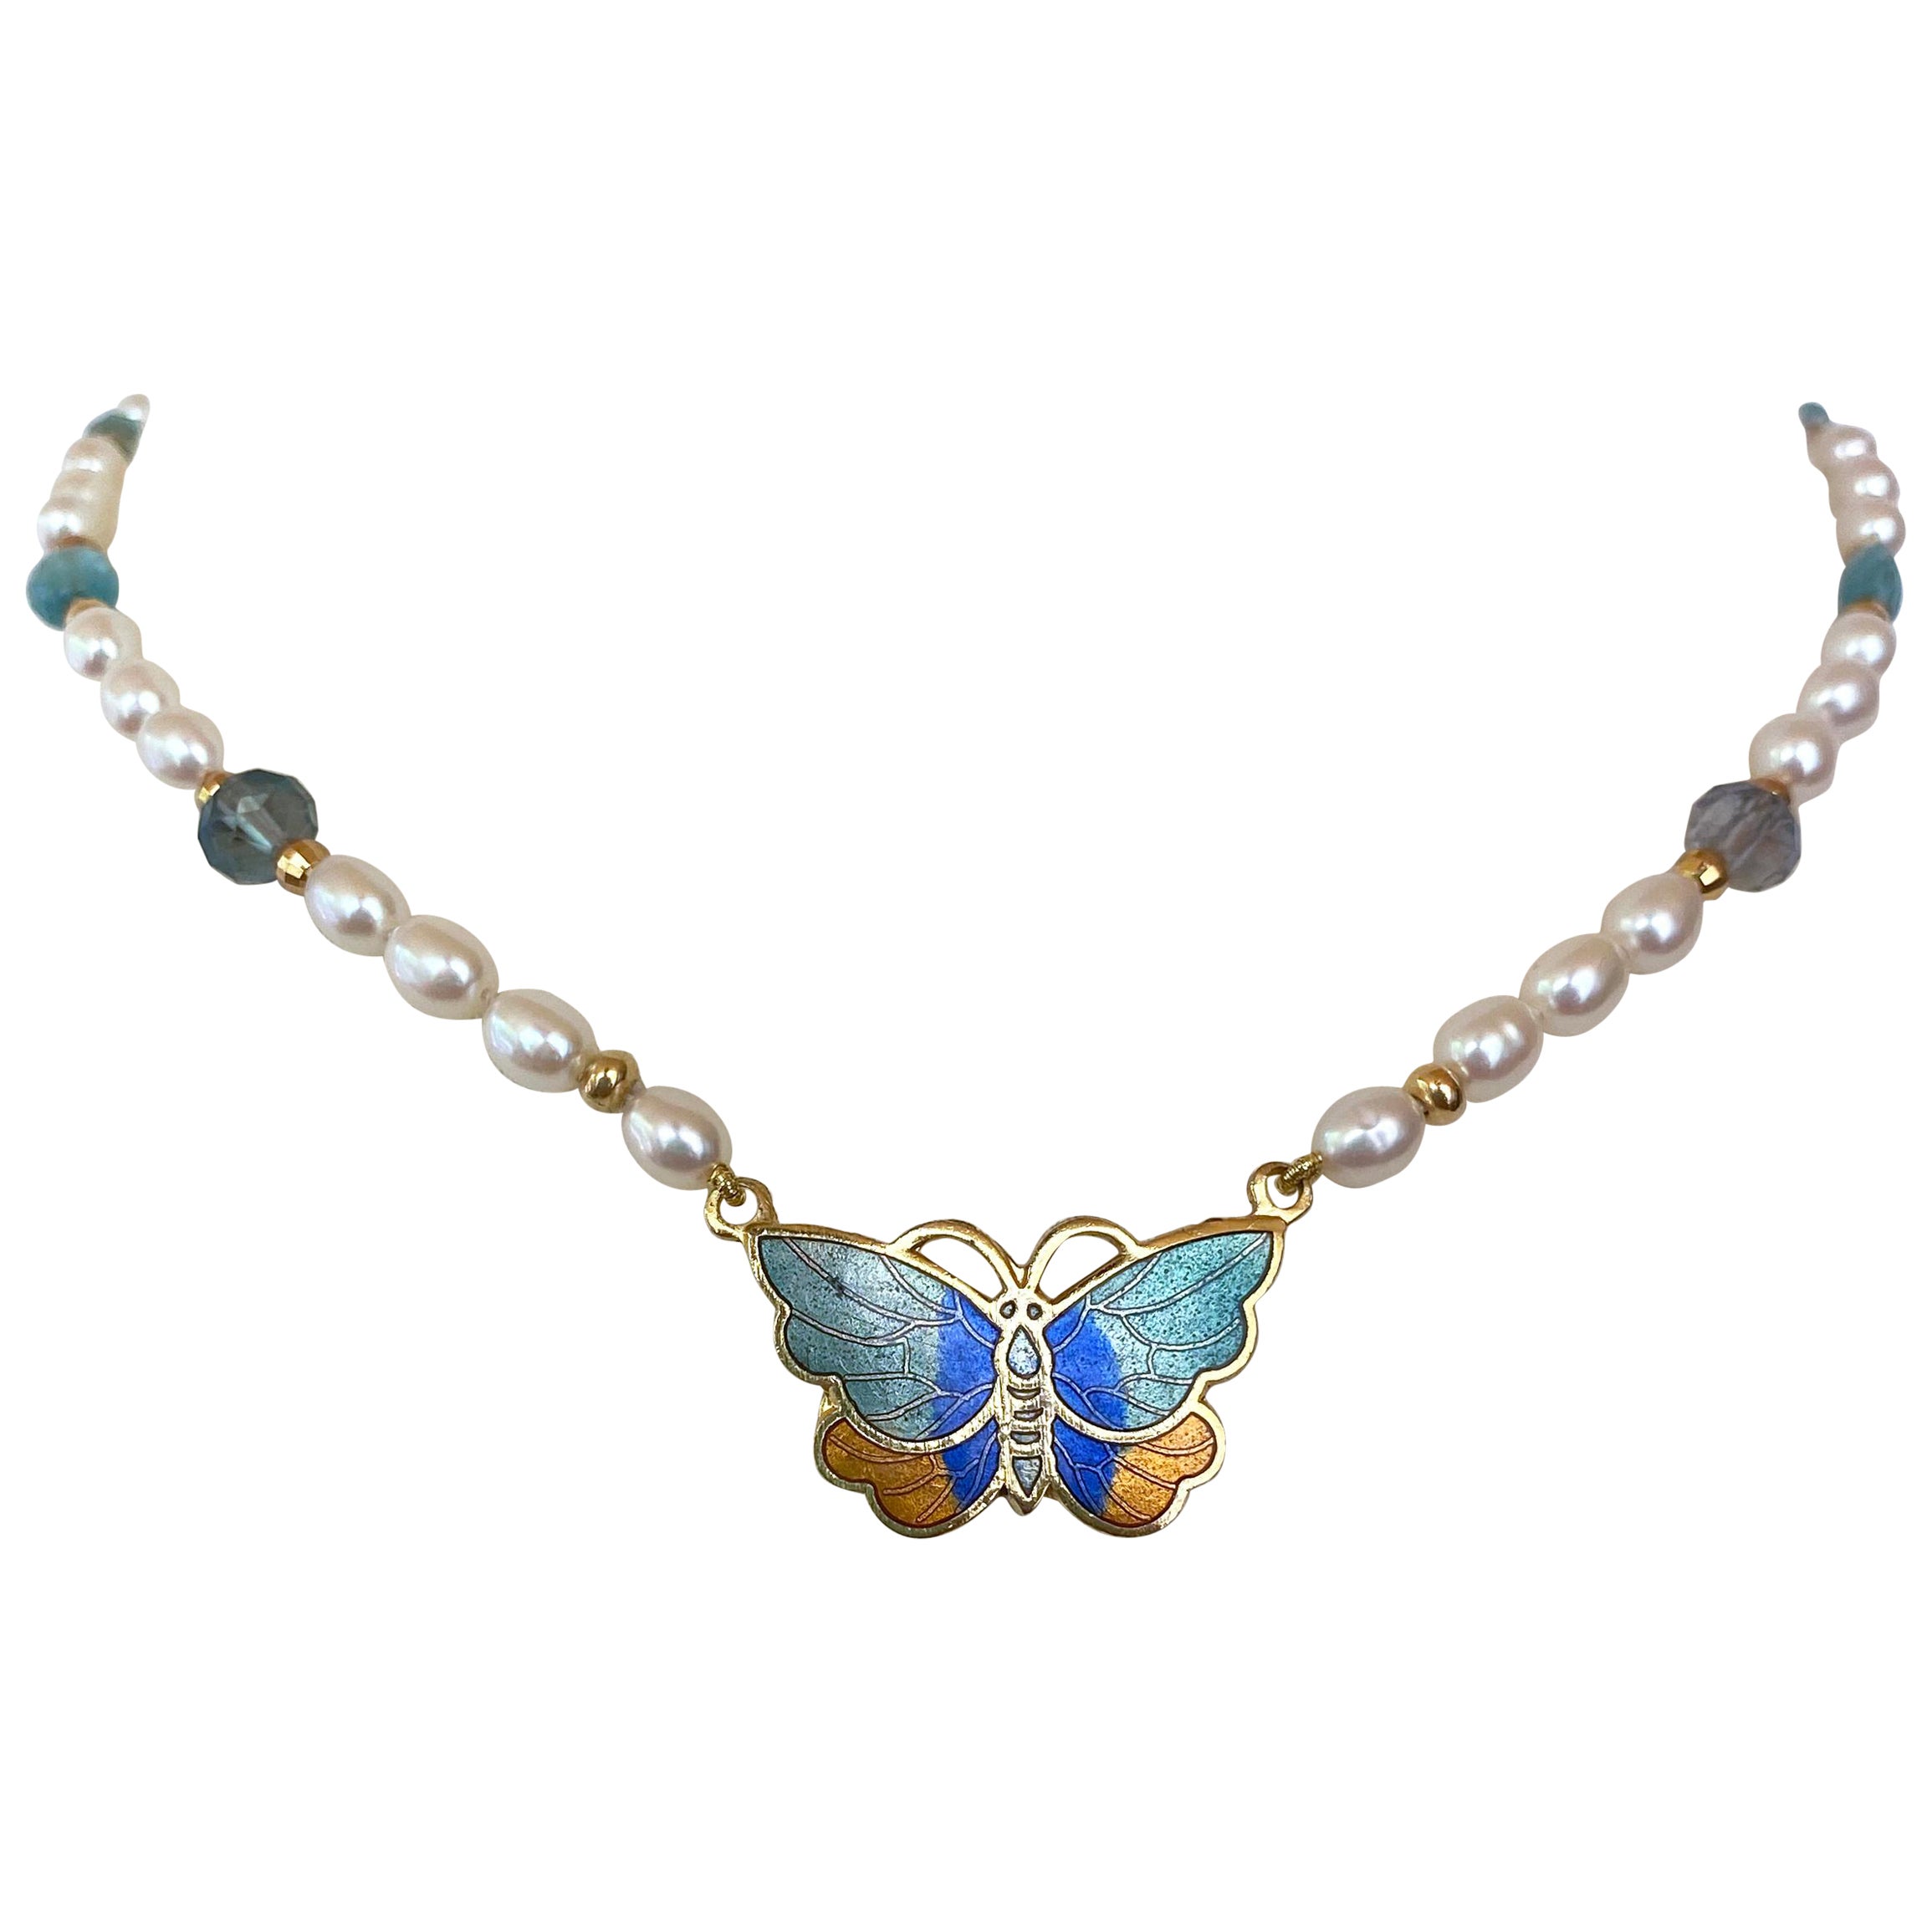 Marina J For Girls Pearl Necklace with Aquamarine & 18k Enameled Butterfly